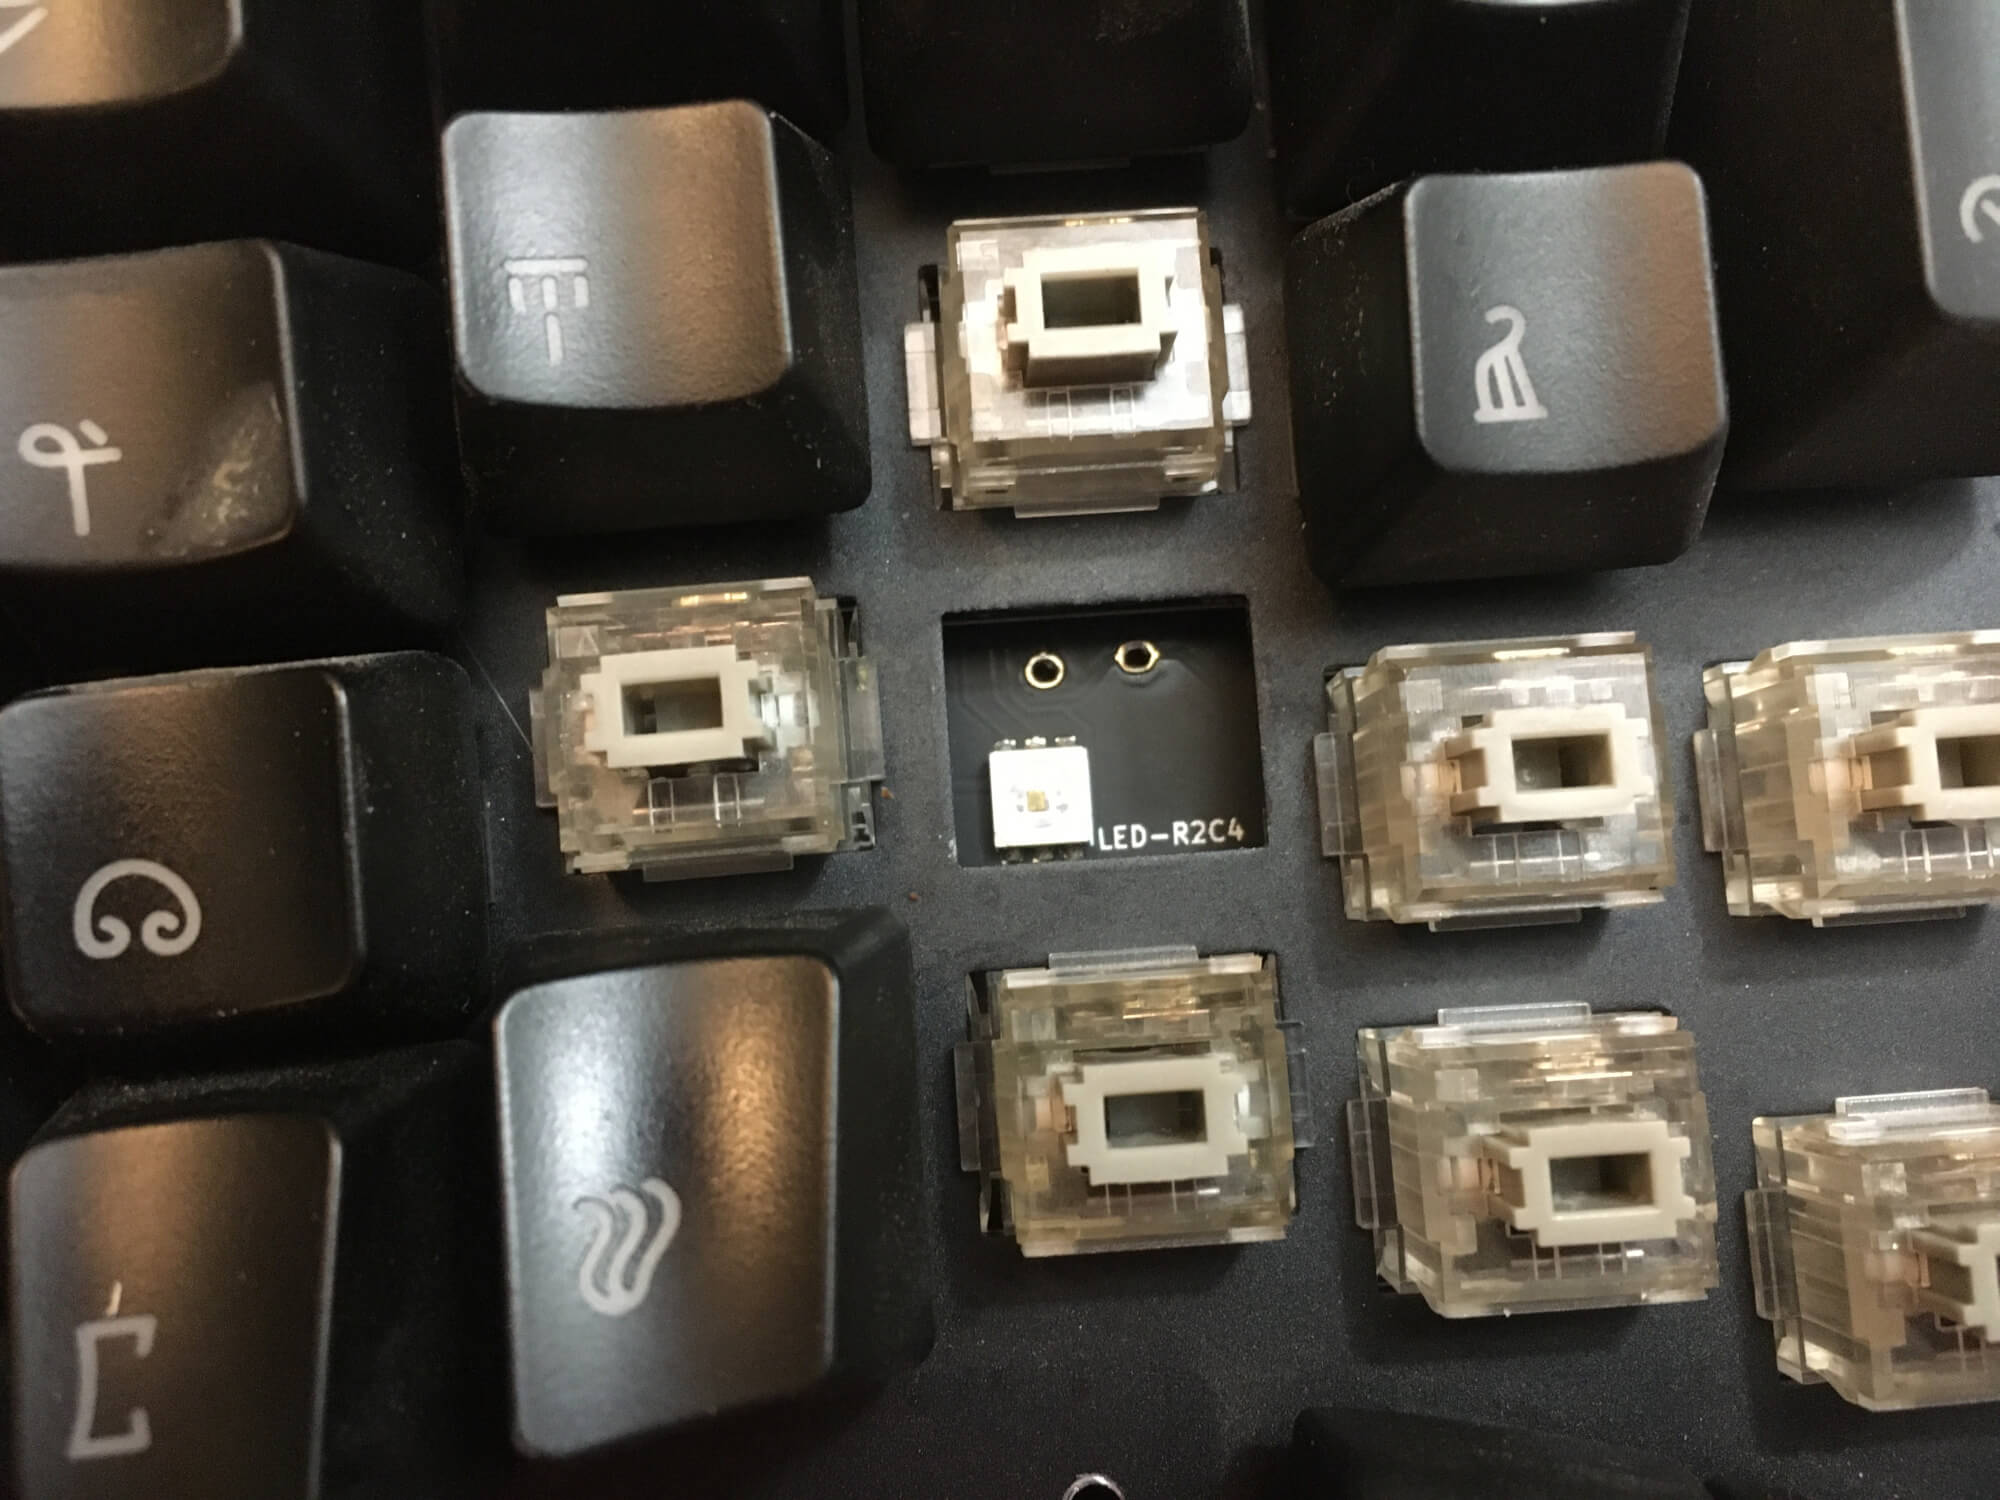 My keyswitch successfully removed.